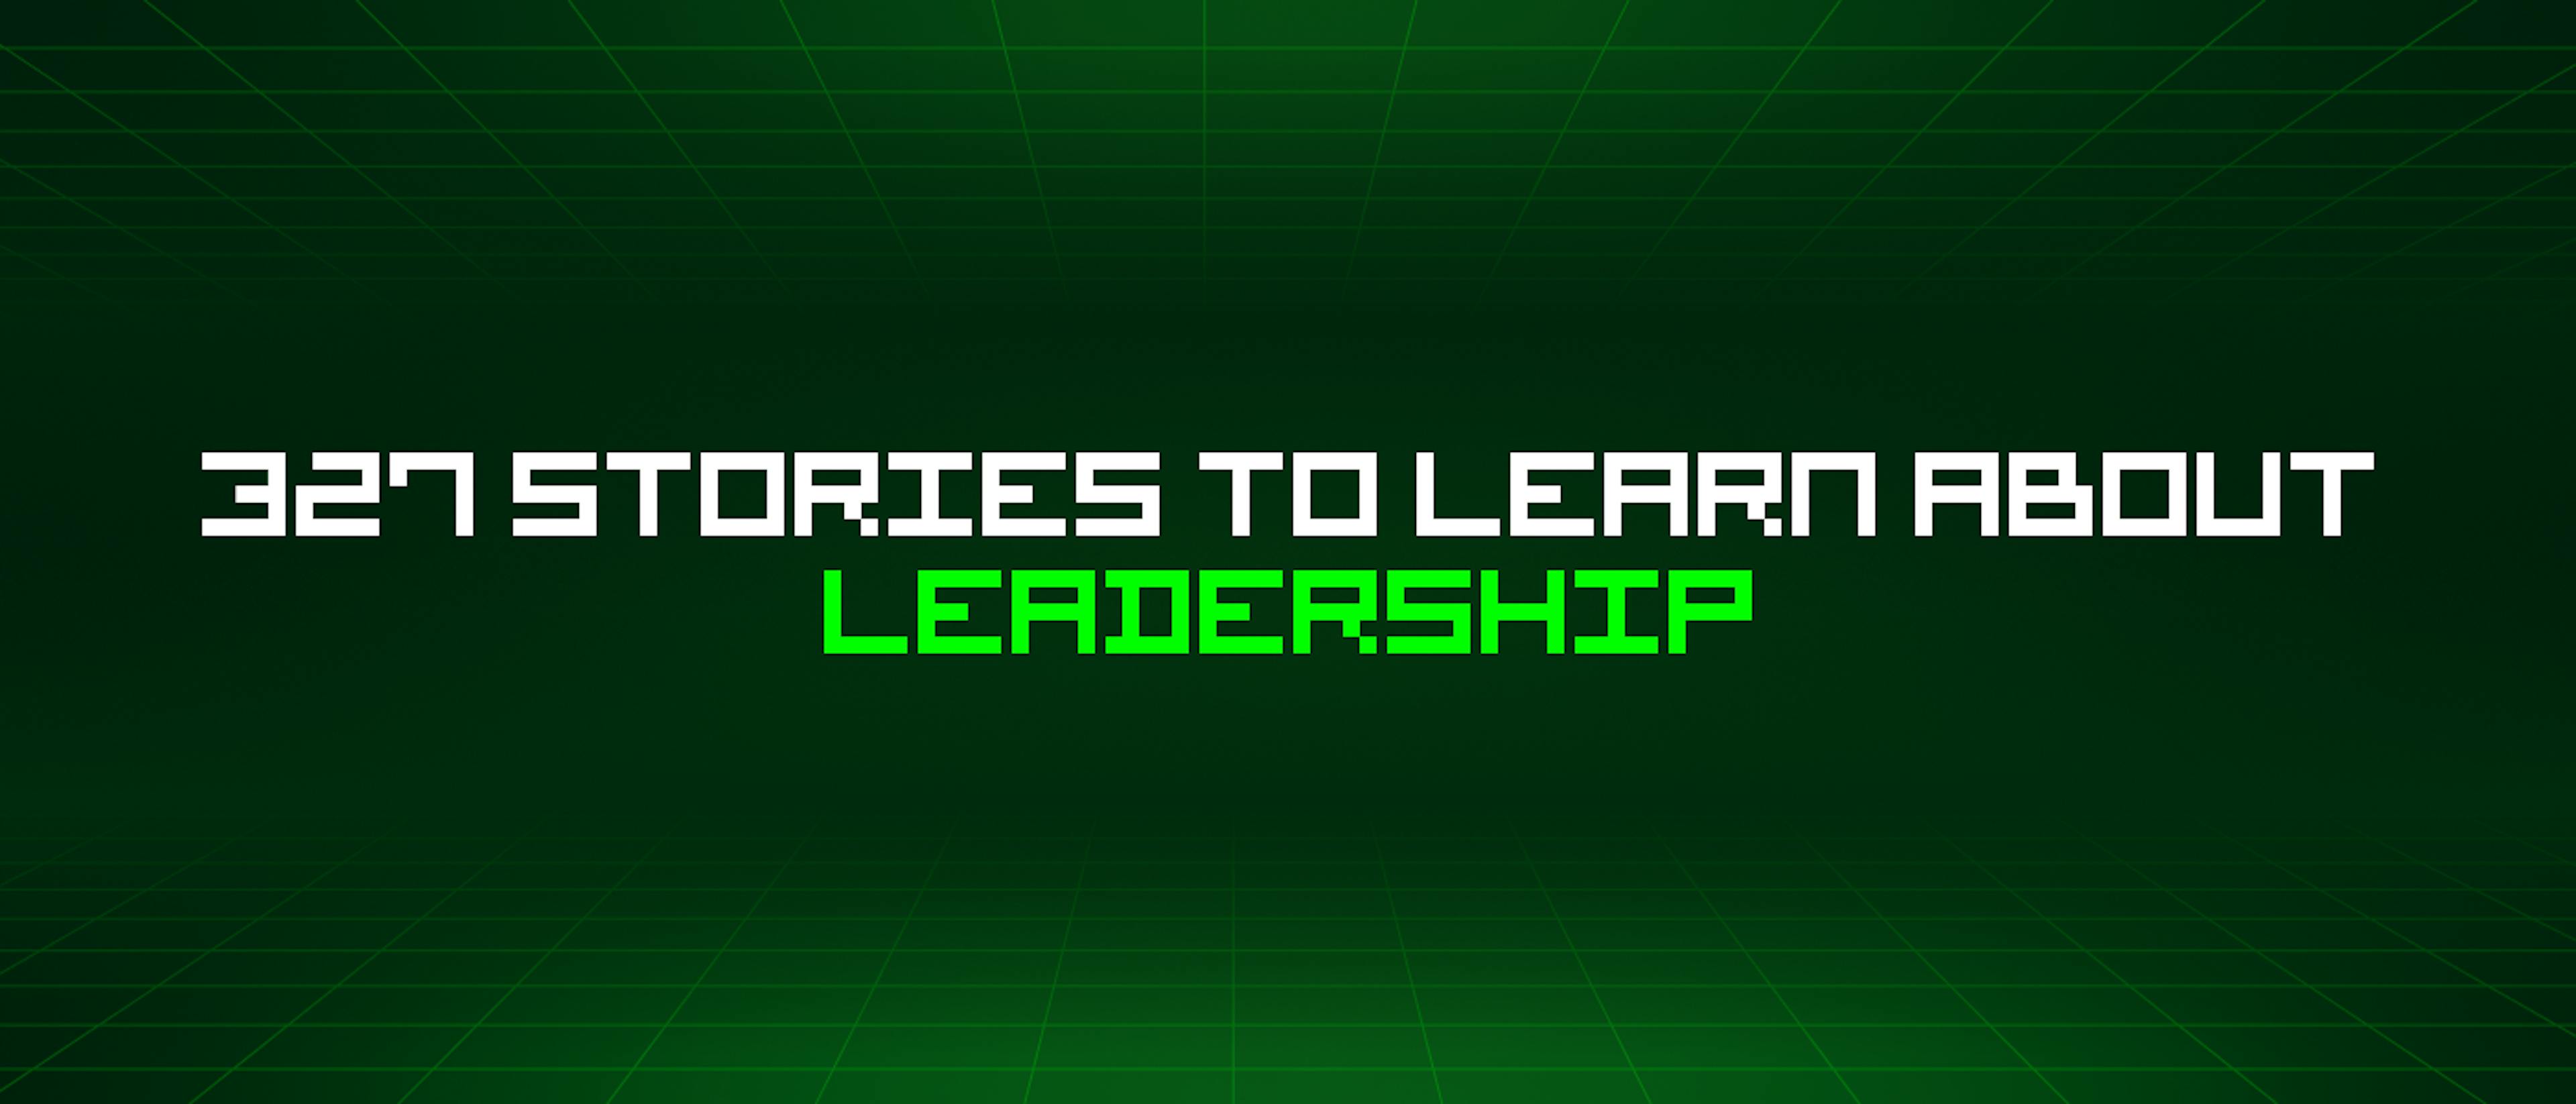 /327-stories-to-learn-about-leadership feature image